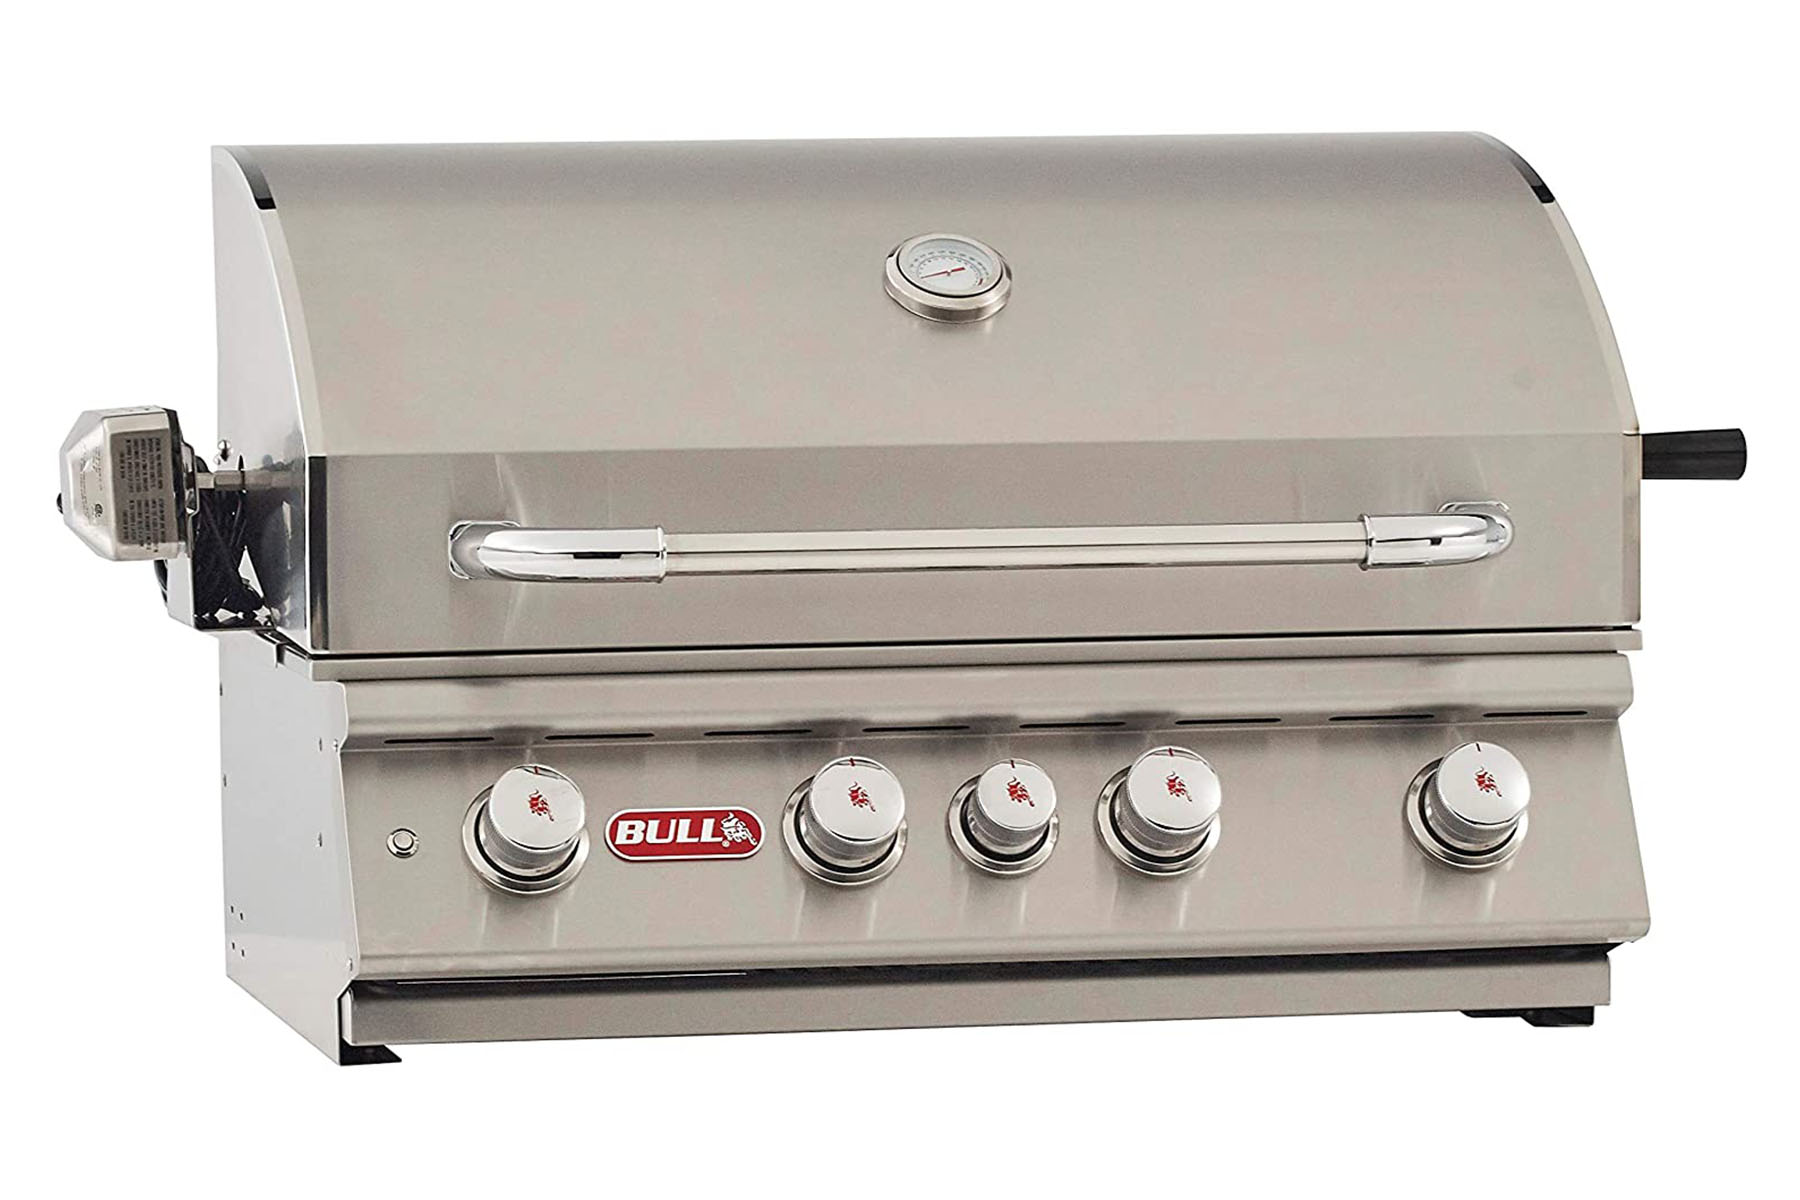 Built In Grills For Outdoor Kitchens, Best Gas Grills For Outdoor Kitchens